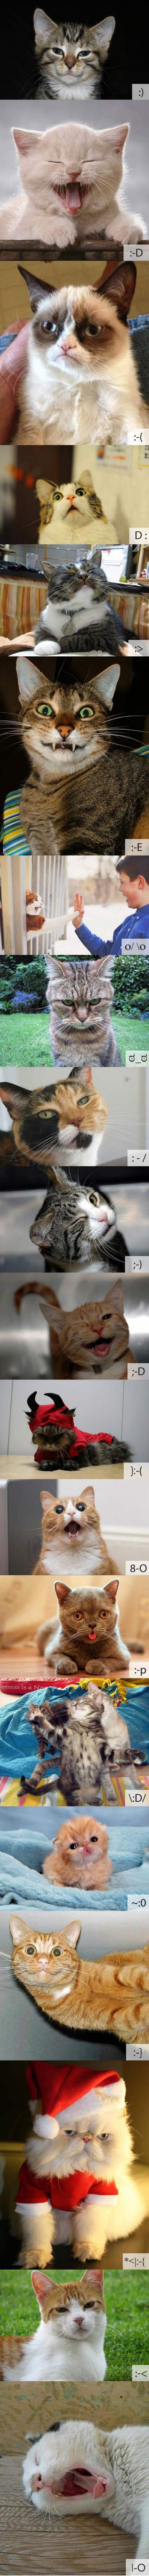 different emoticons with cats funny picture